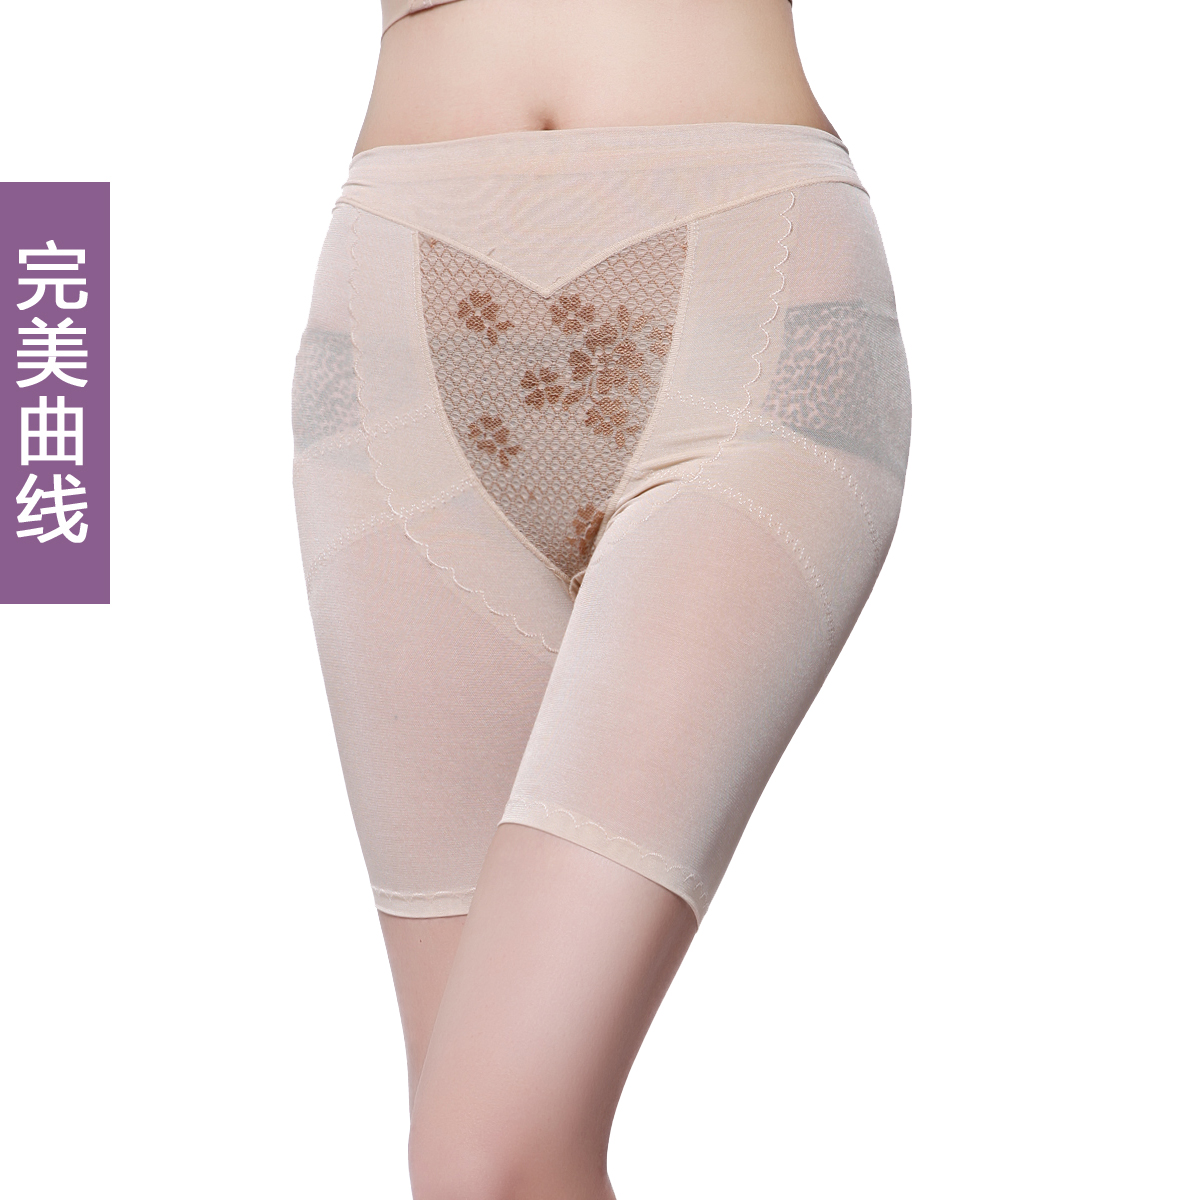 Perfect curve high waist abdomen drawing butt-lifting body shaping pants slimming corset beauty care panties puerperal female